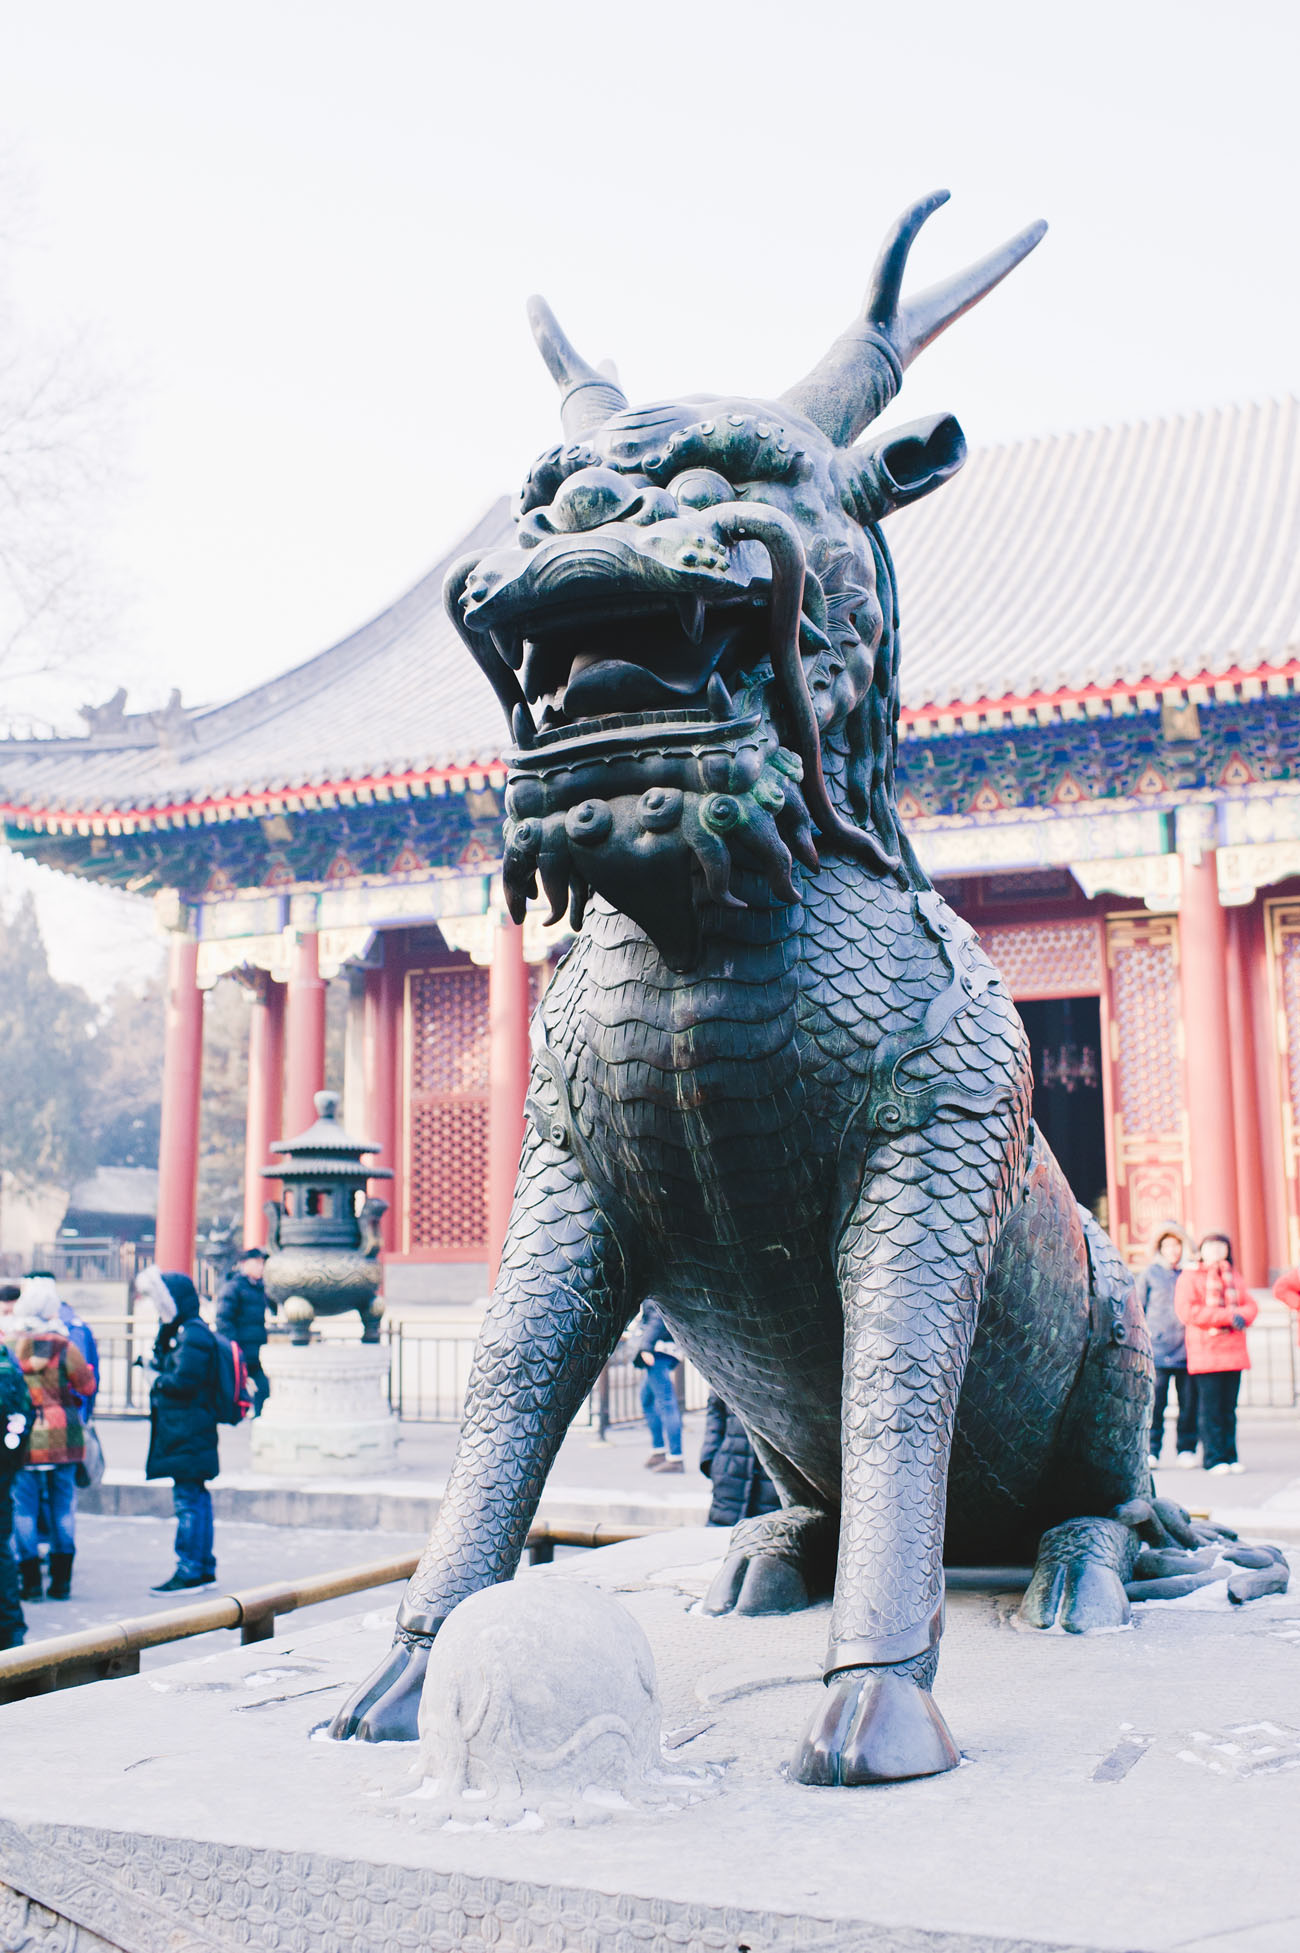 Dragon Statue in Summer Palace